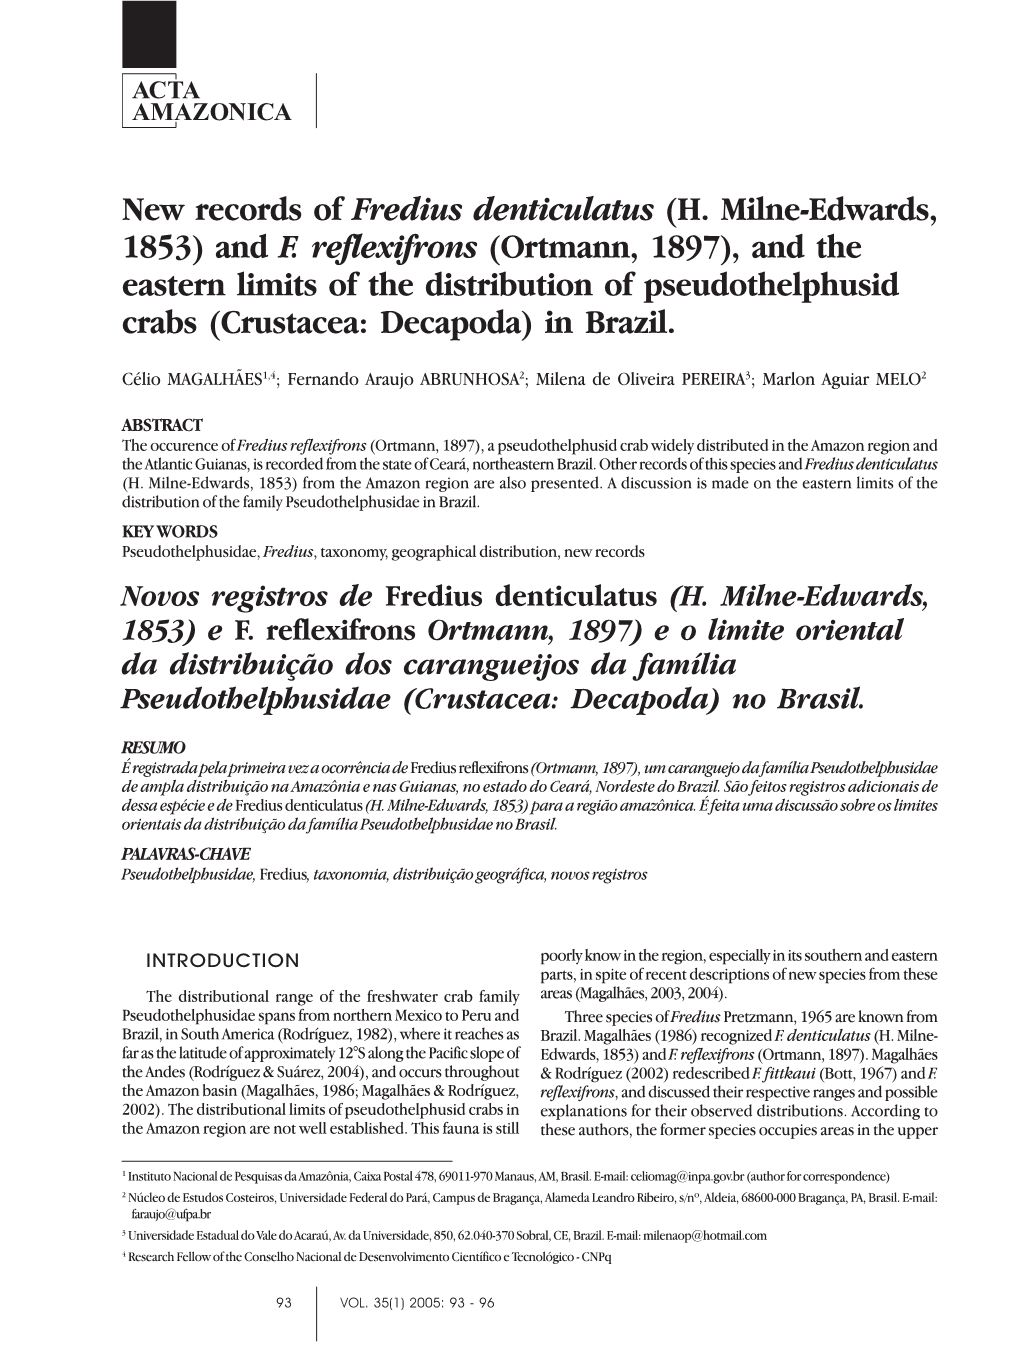 New Records of Fredius Denticulatus (H. Milne-Edwards, 1853) and F. Reflexifrons (Ortmann, 1897), and the Eastern Limits Of